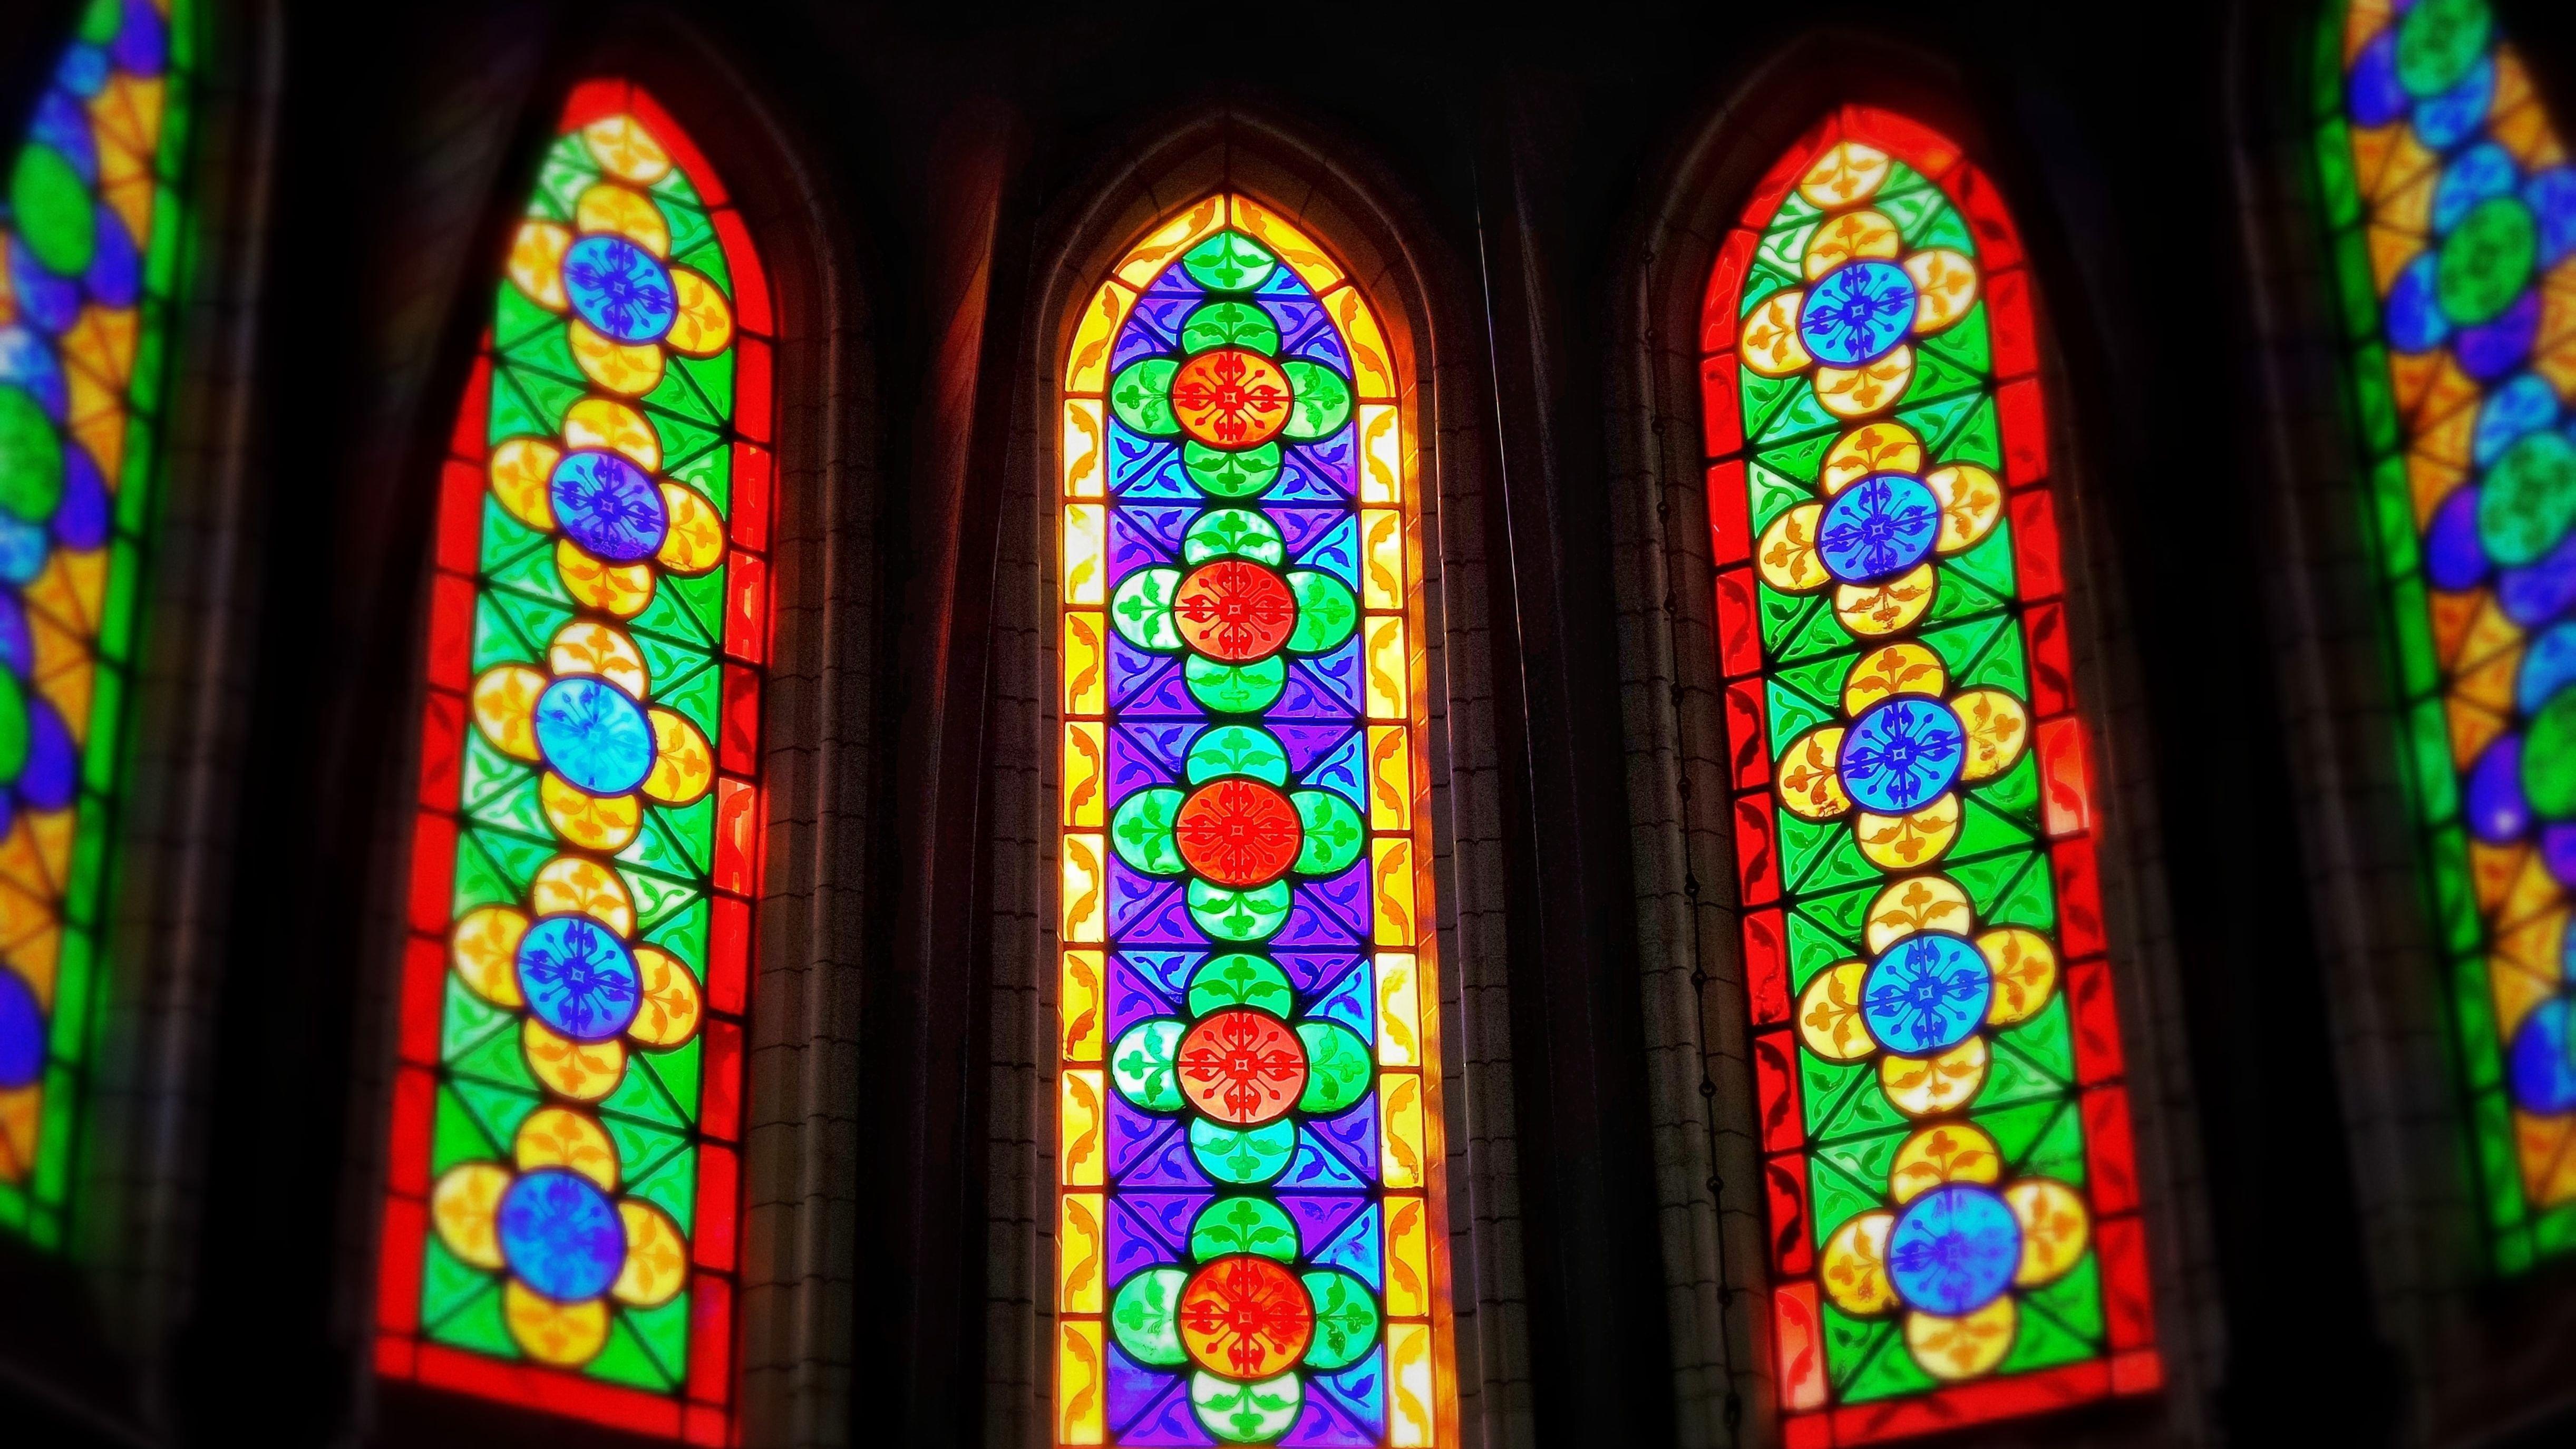 Church Stained-Glass Windows